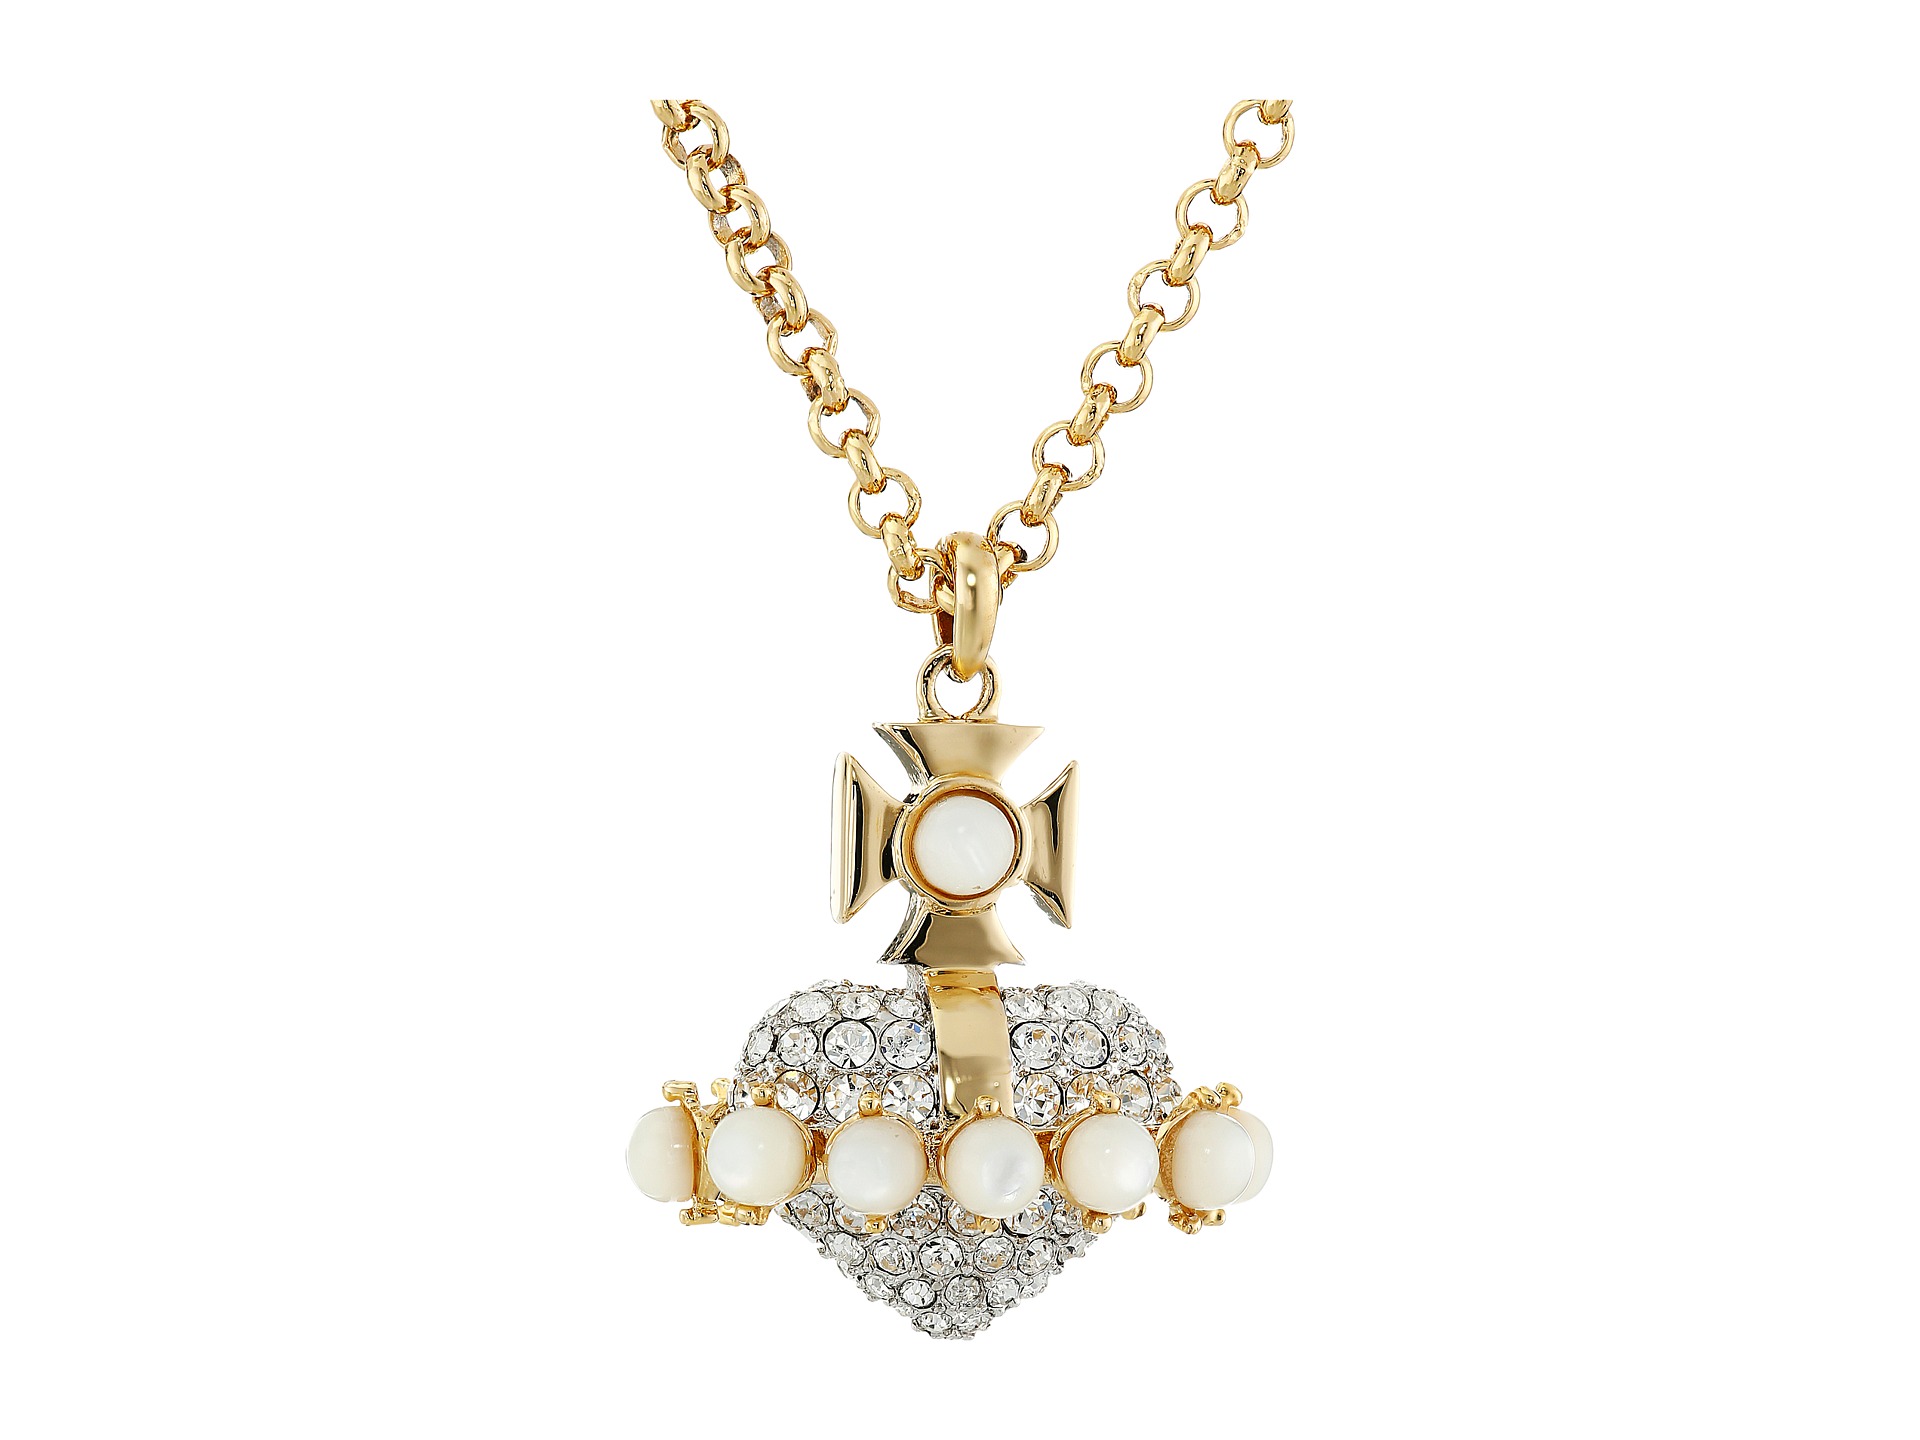 Vivienne Westwood Oona Large 3D Orb Pendant White Mop/Crystal - Zappos.com Free Shipping BOTH Ways